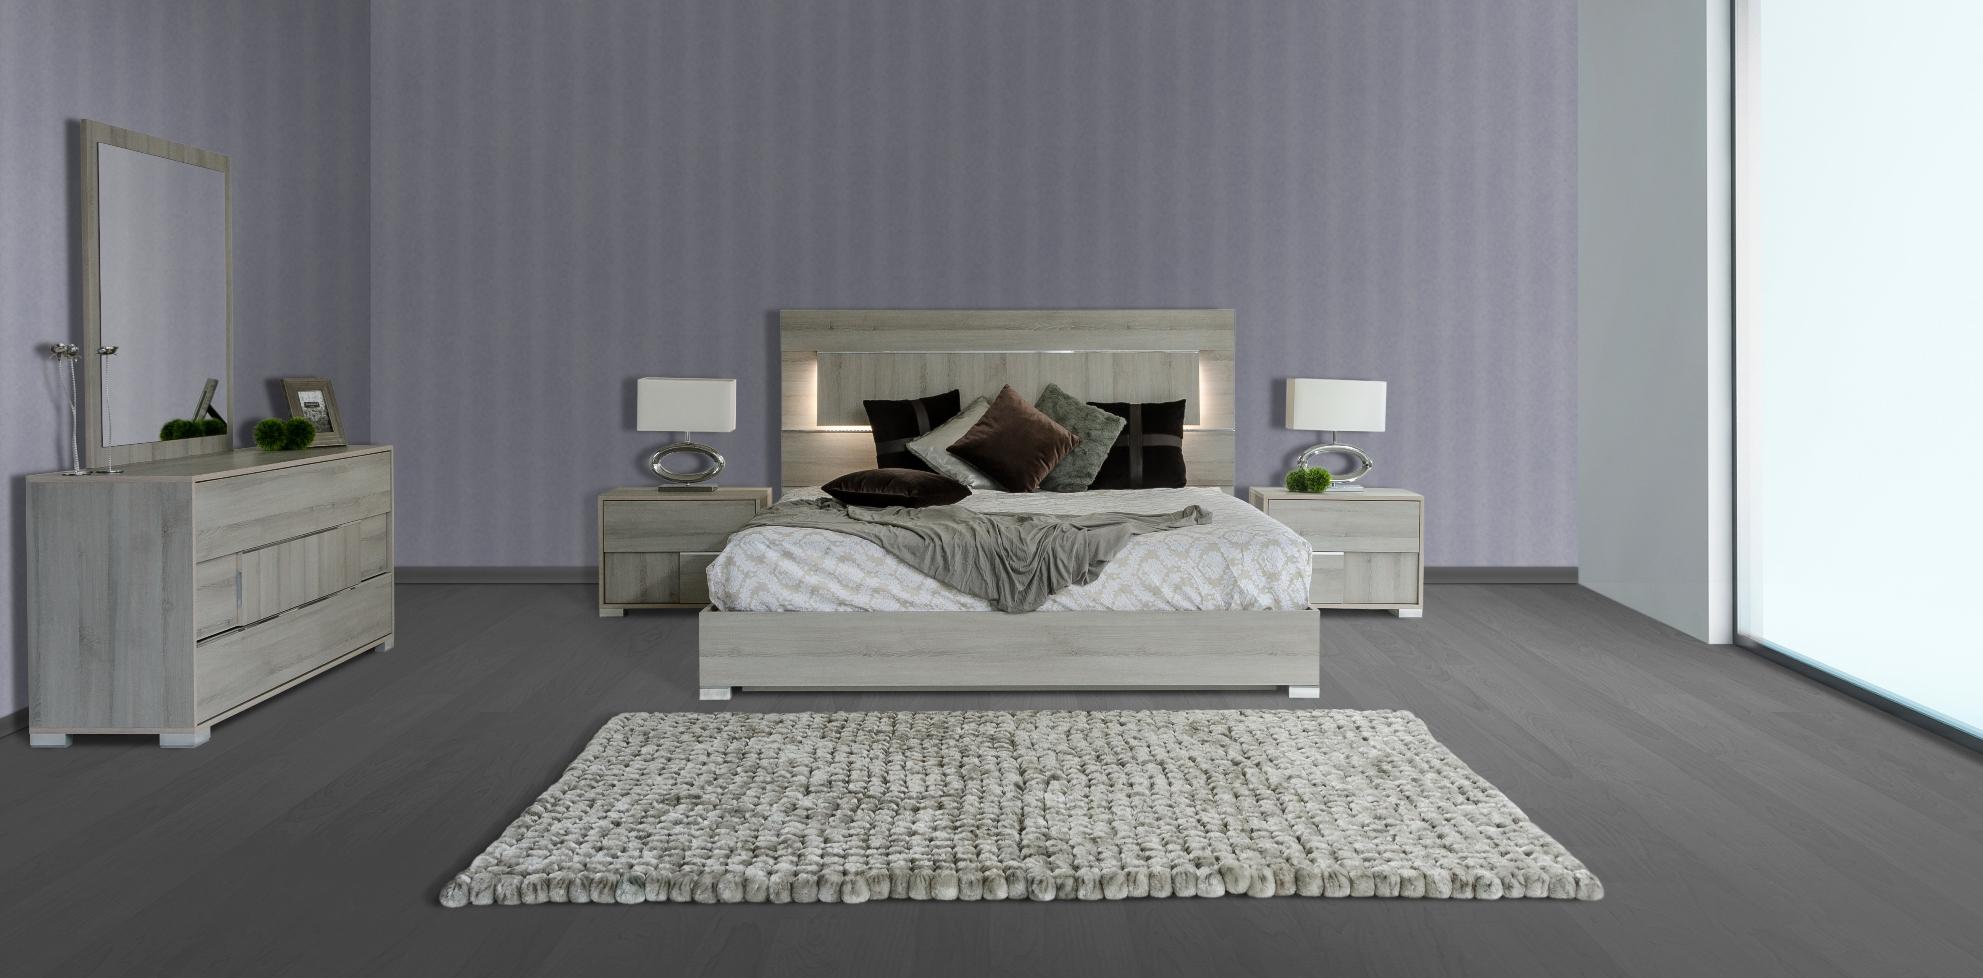 Contemporary, Modern Platform Bedroom Set Modrest Ethan VGACETHAN-SET-GRY-Q-5 in Gray Lacquer